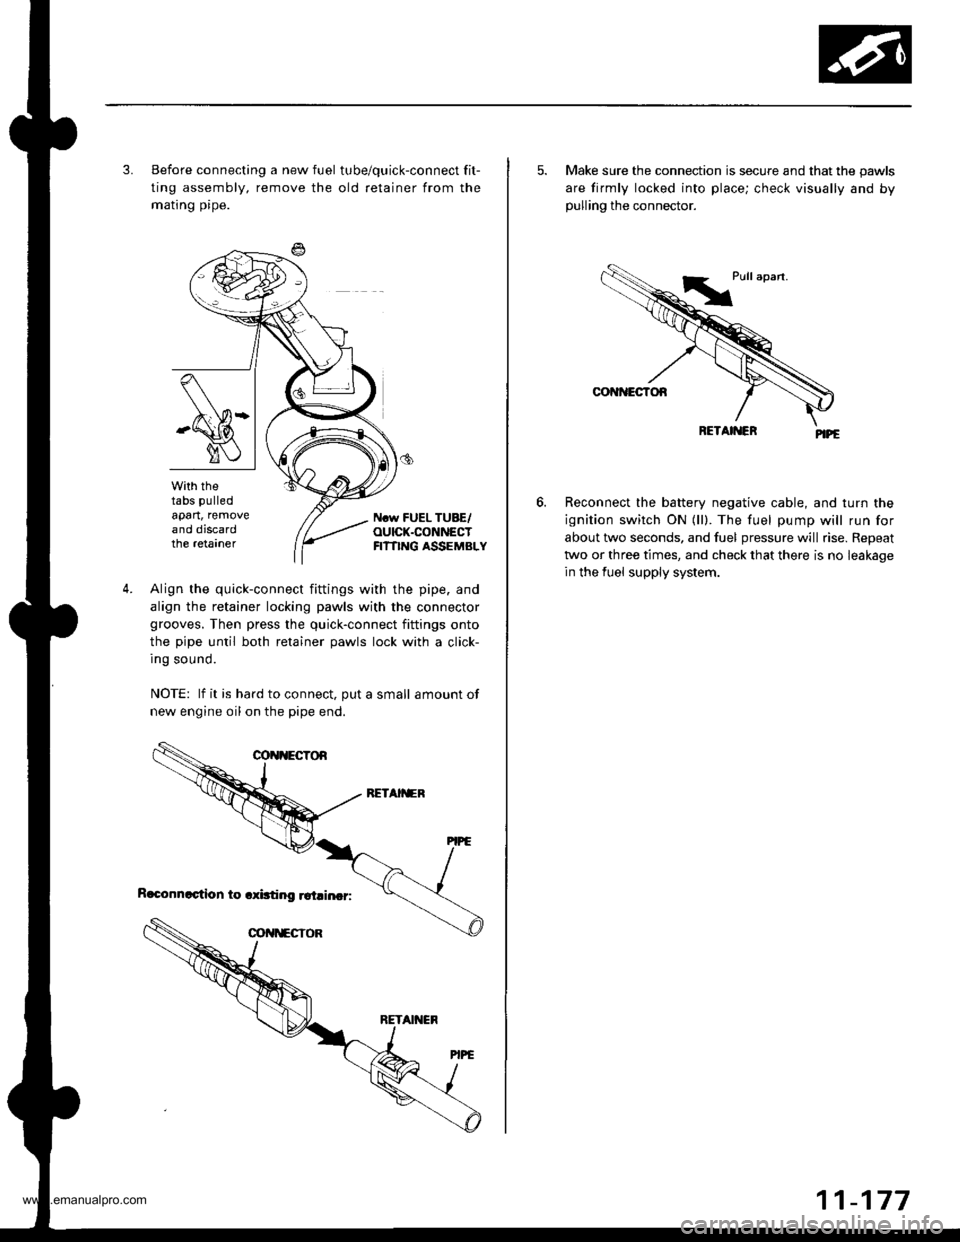 HONDA CR-V 1998 RD1-RD3 / 1.G Service Manual 
3. Before connecting a new fuel tube/quick-connect fit-
ting assembly, remove the old retainer from the
mating pipe.
with thetabs pulled
apart, removeand discardthe retarner
Ncw FUEL TUBE/OUICK.CONNE